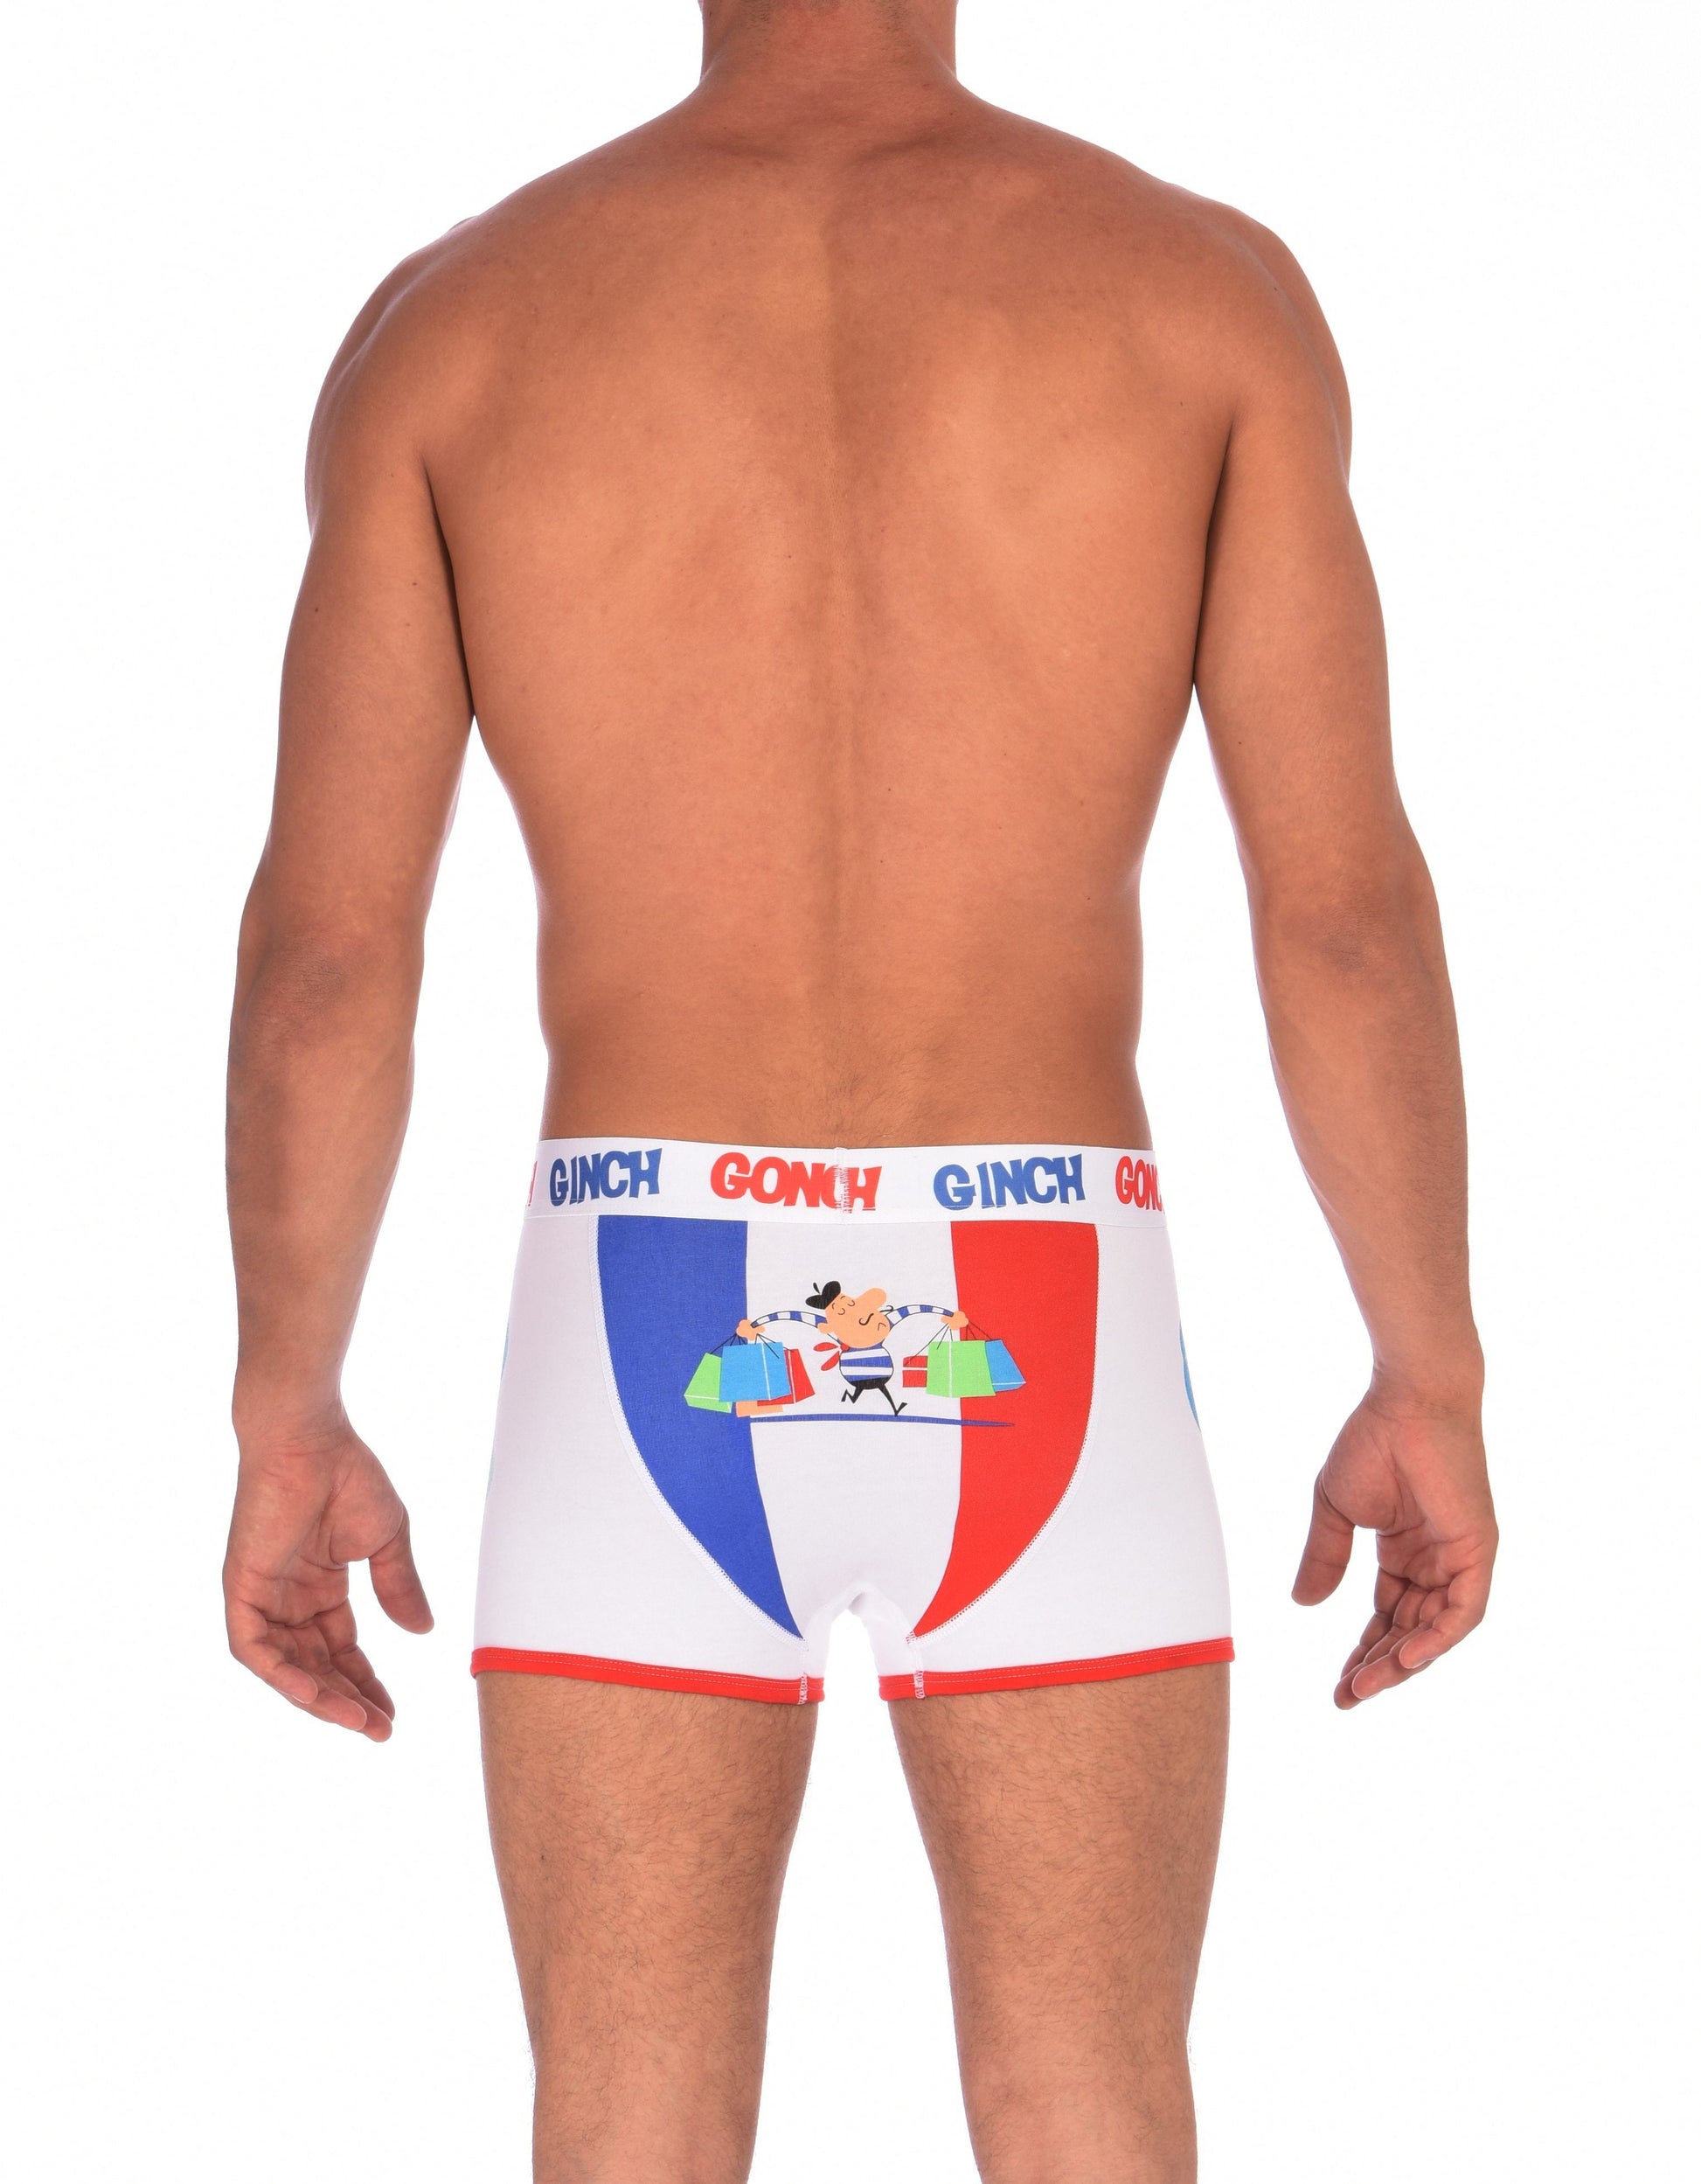 GG Ginch Gonch I Love Paris Boxer Brief - Men's Underwear white fabric with scene of french flag and french person red and white trim and white printed waistband back